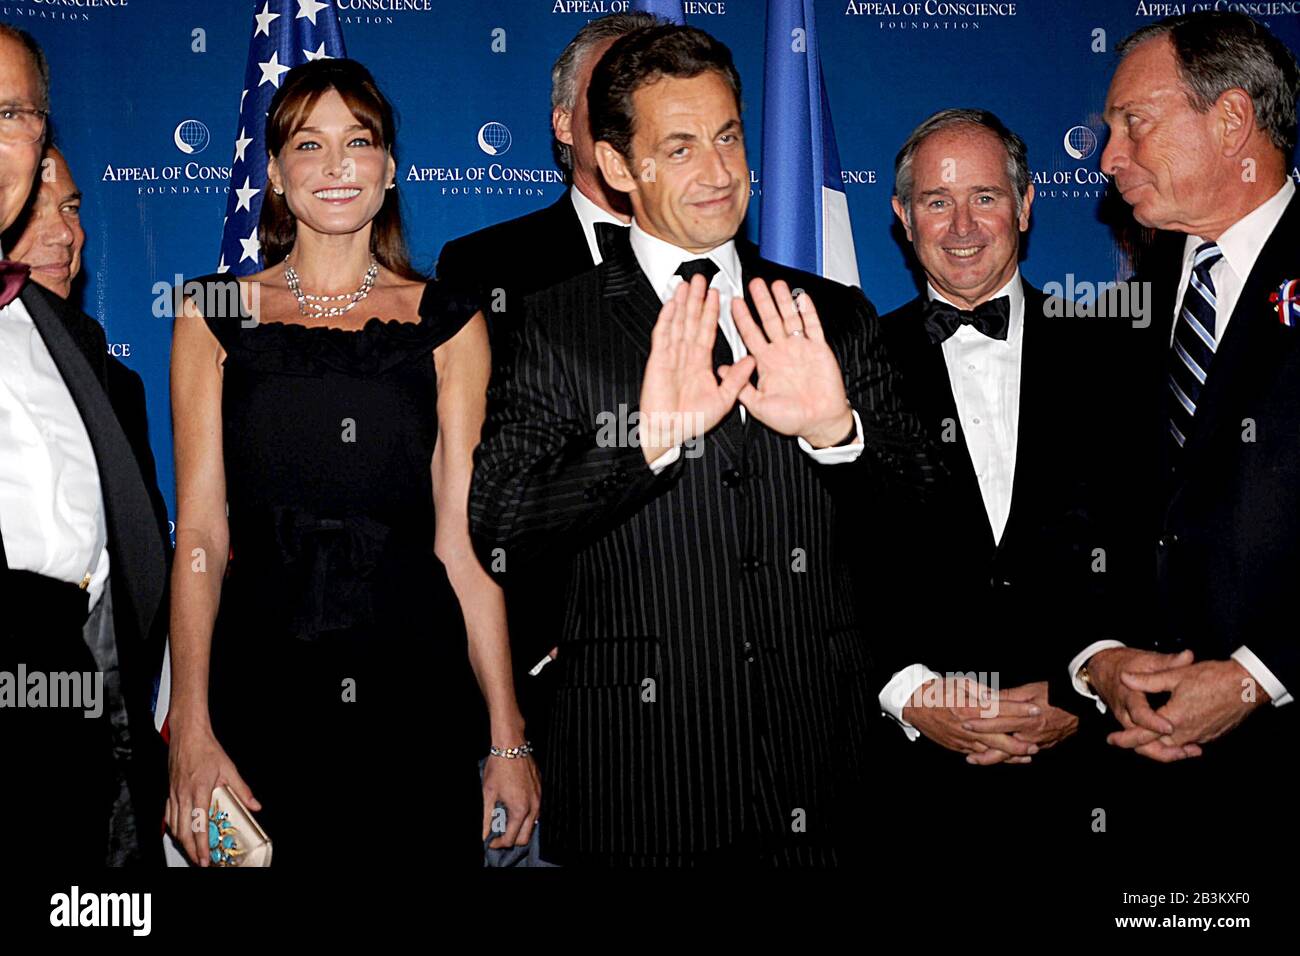 NEW YORK - SEPTEMBER 23: French President Nicolas Sarkozy (2nd R) embraces New York Mayor Michael Bloomberg (R) as Carla Bruni Sarkozy (2nd L) and designer Ralph Lauren (L) look on at the 2008 Appeal of Conscience Foundation awards dinner at the Waldorf-Astoria hotel September 23, 2008 in New York City. French President Nicolas Sarkozy was presented with the Appeal of Conscience World Statesman Award for 'his leadership in advancing freedom, tolerance and inter-religious understanding   People:  Michael Bloomberg, Nicolas Sarkozy, Carla Bruni Sarkozy   Must call if interested Michael Storms St Stock Photo